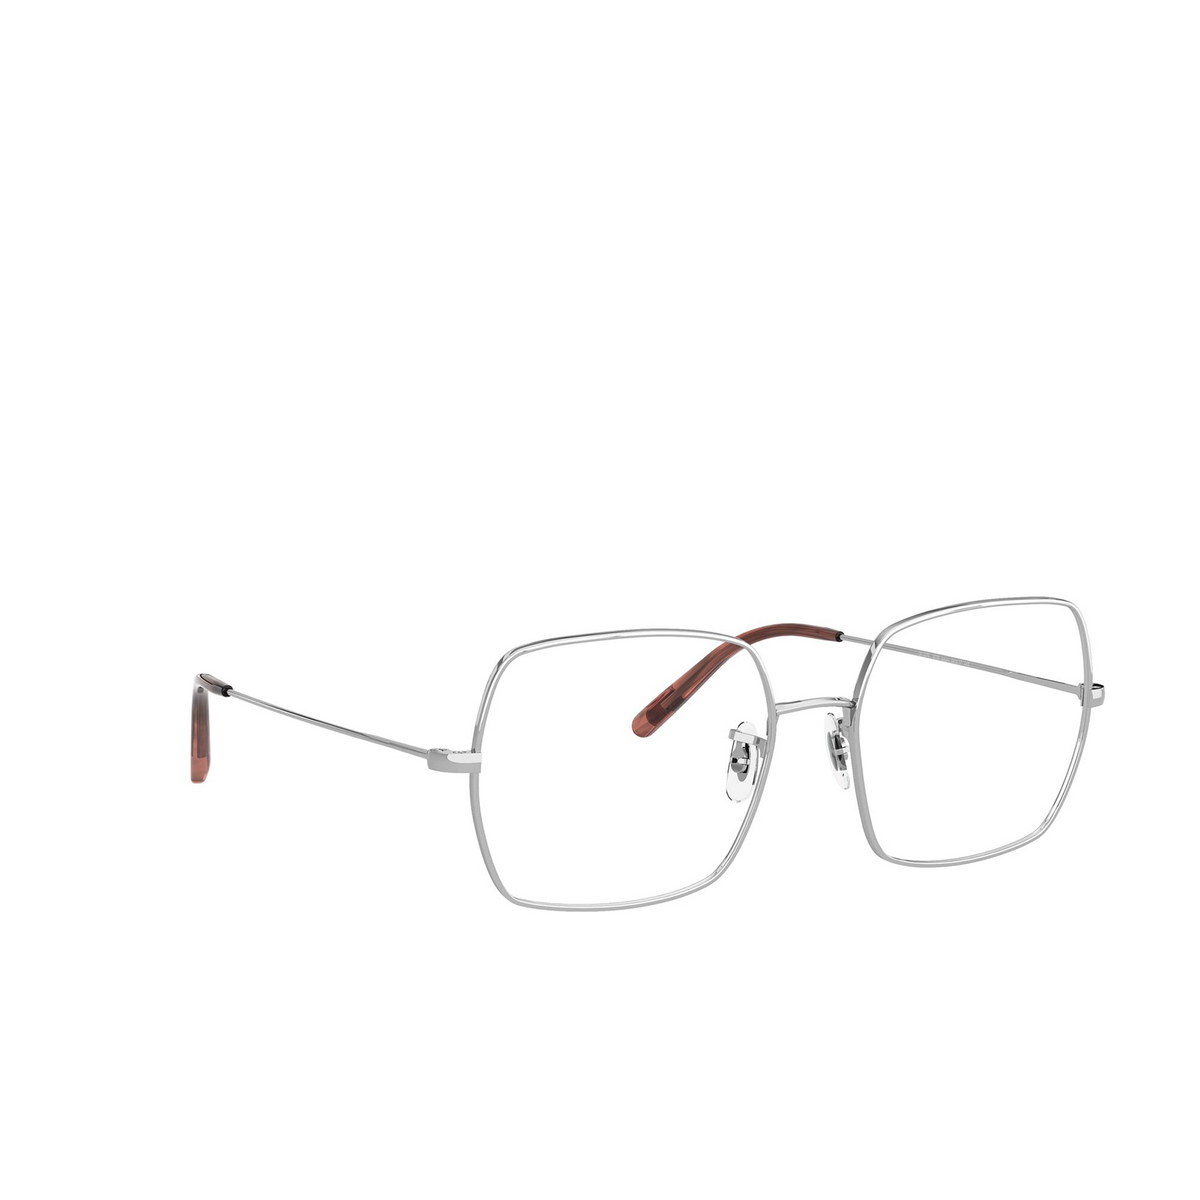 Oliver Peoples® Irregular Eyeglasses: OV1279 Justyna color 5036 Silver - three-quarters view